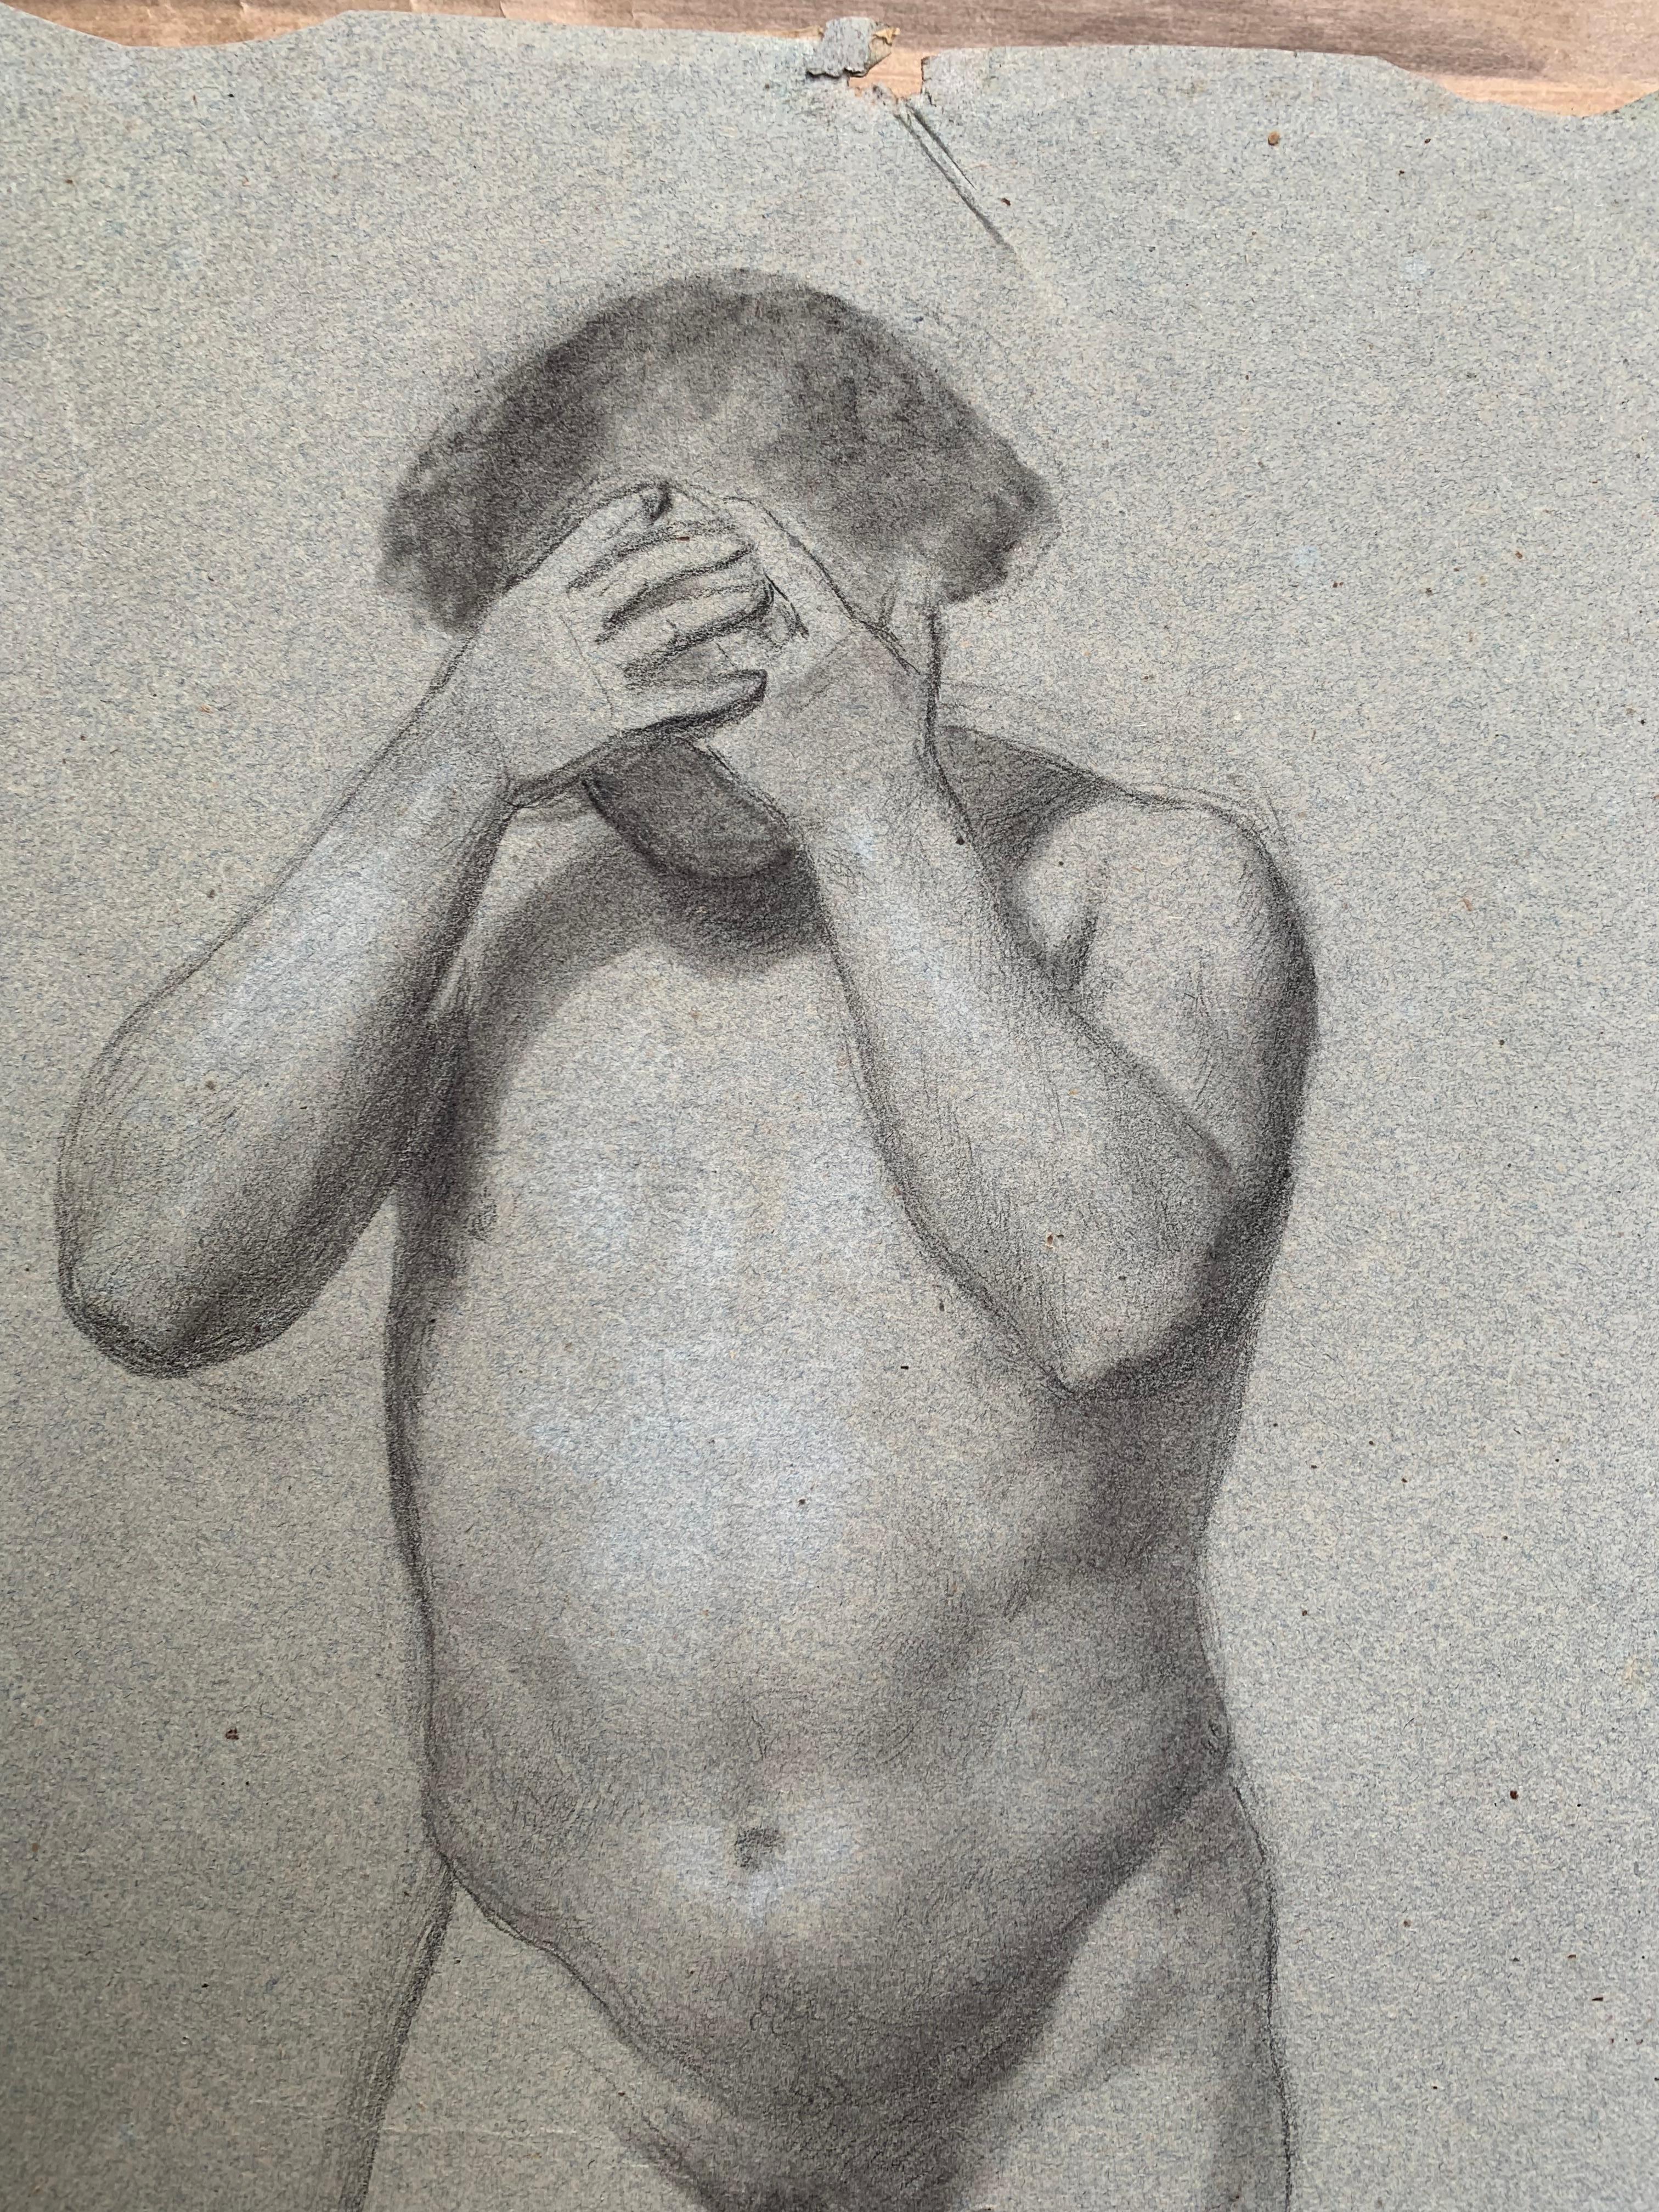 Preparatory anatomical study for the figure of a man with hands on his face. For Sale 1